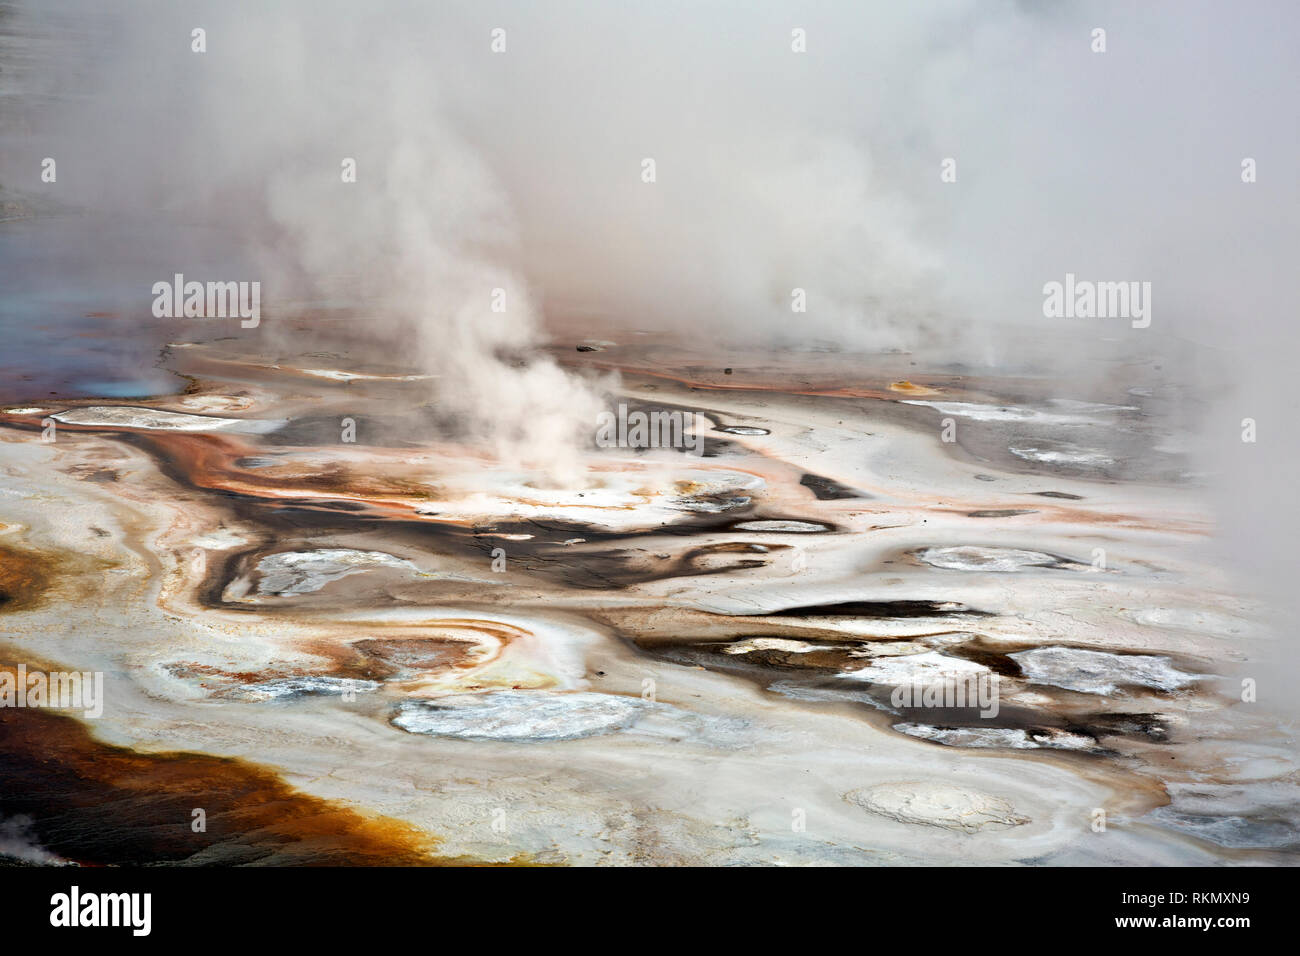 WY03427-00...WYOMING - Patterns made by the fumerals and hot springs in the Porcelain Basin area of Norris Geyser Basin in Yellowstone National Park. Stock Photo